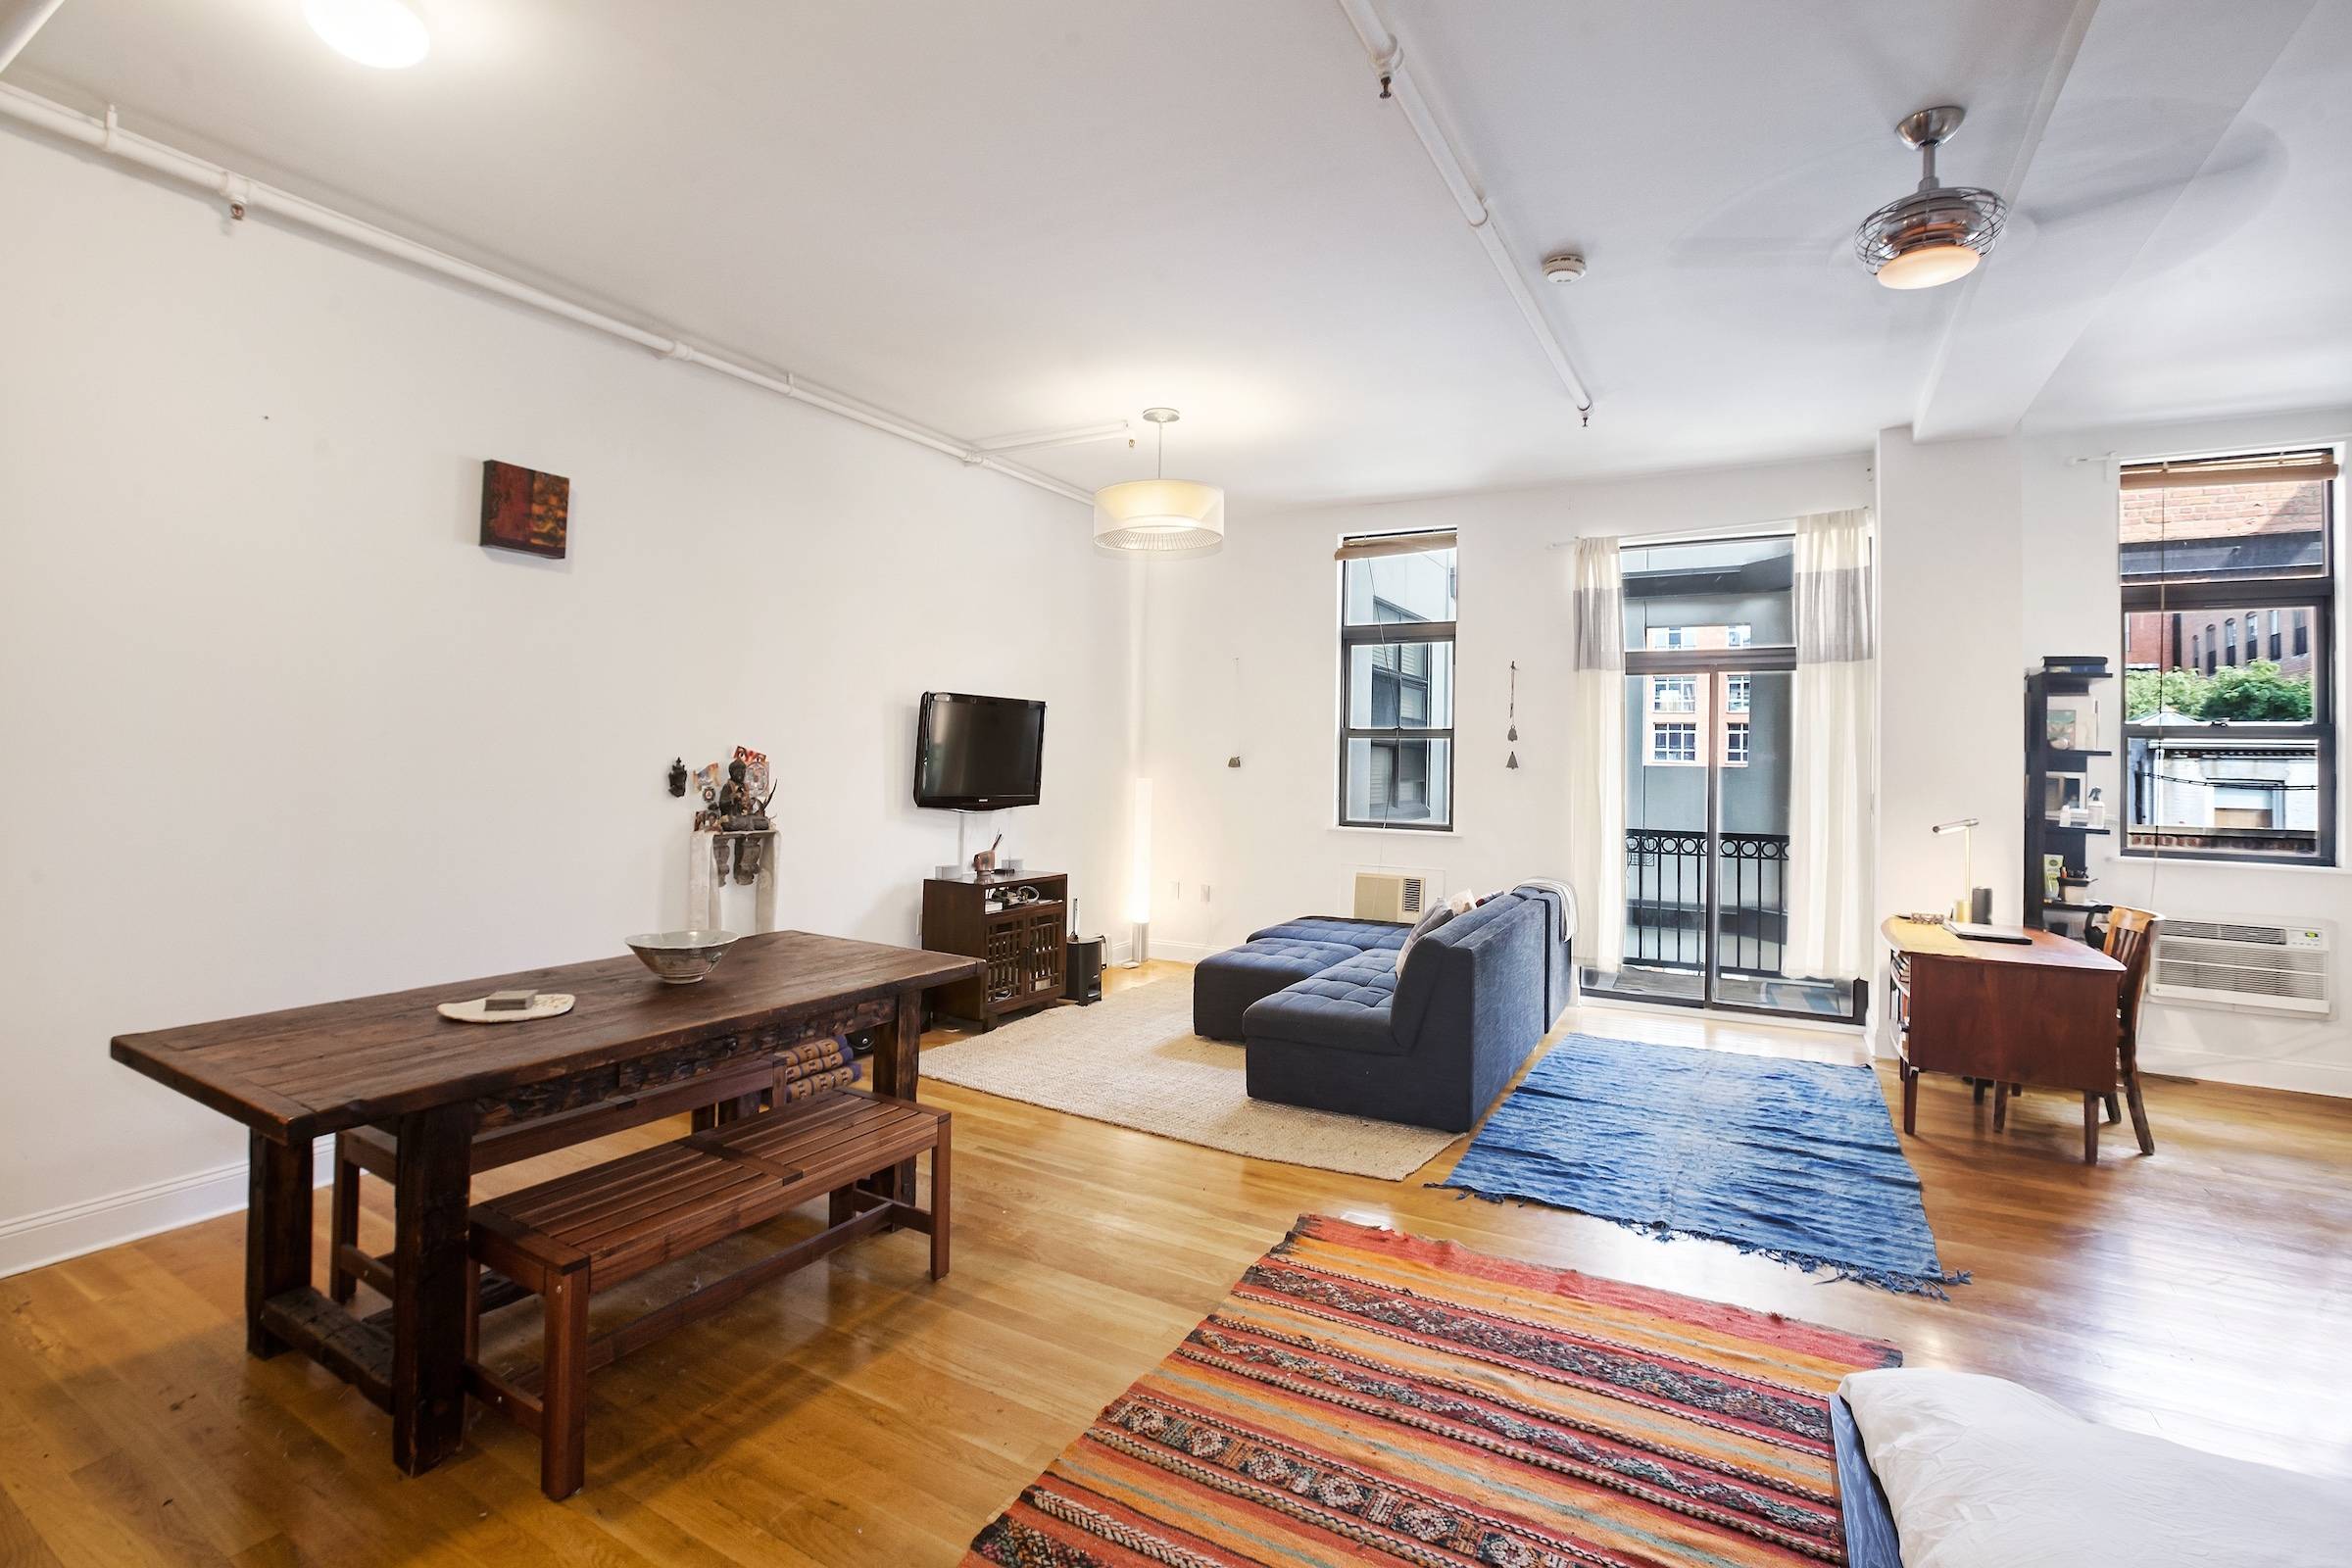 This charming and spacious open studio loft with private balcony boasts 11 ft high ceilings and beautiful hardwood floors.